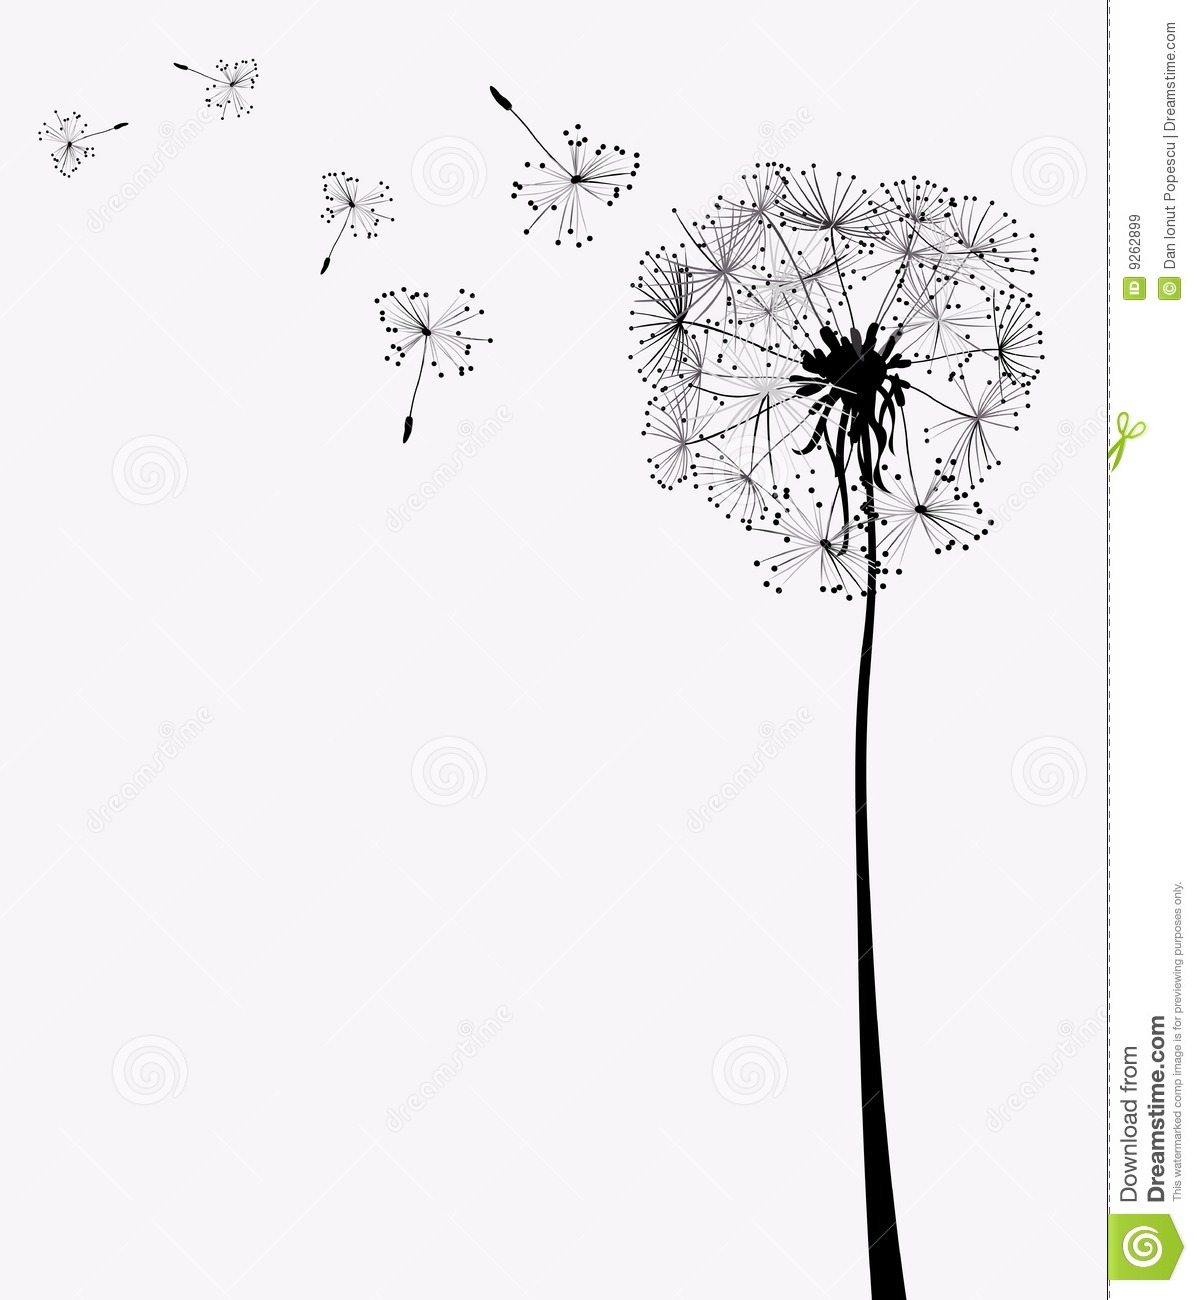 Dandelions Royalty Free Stock Images   Image  9262899